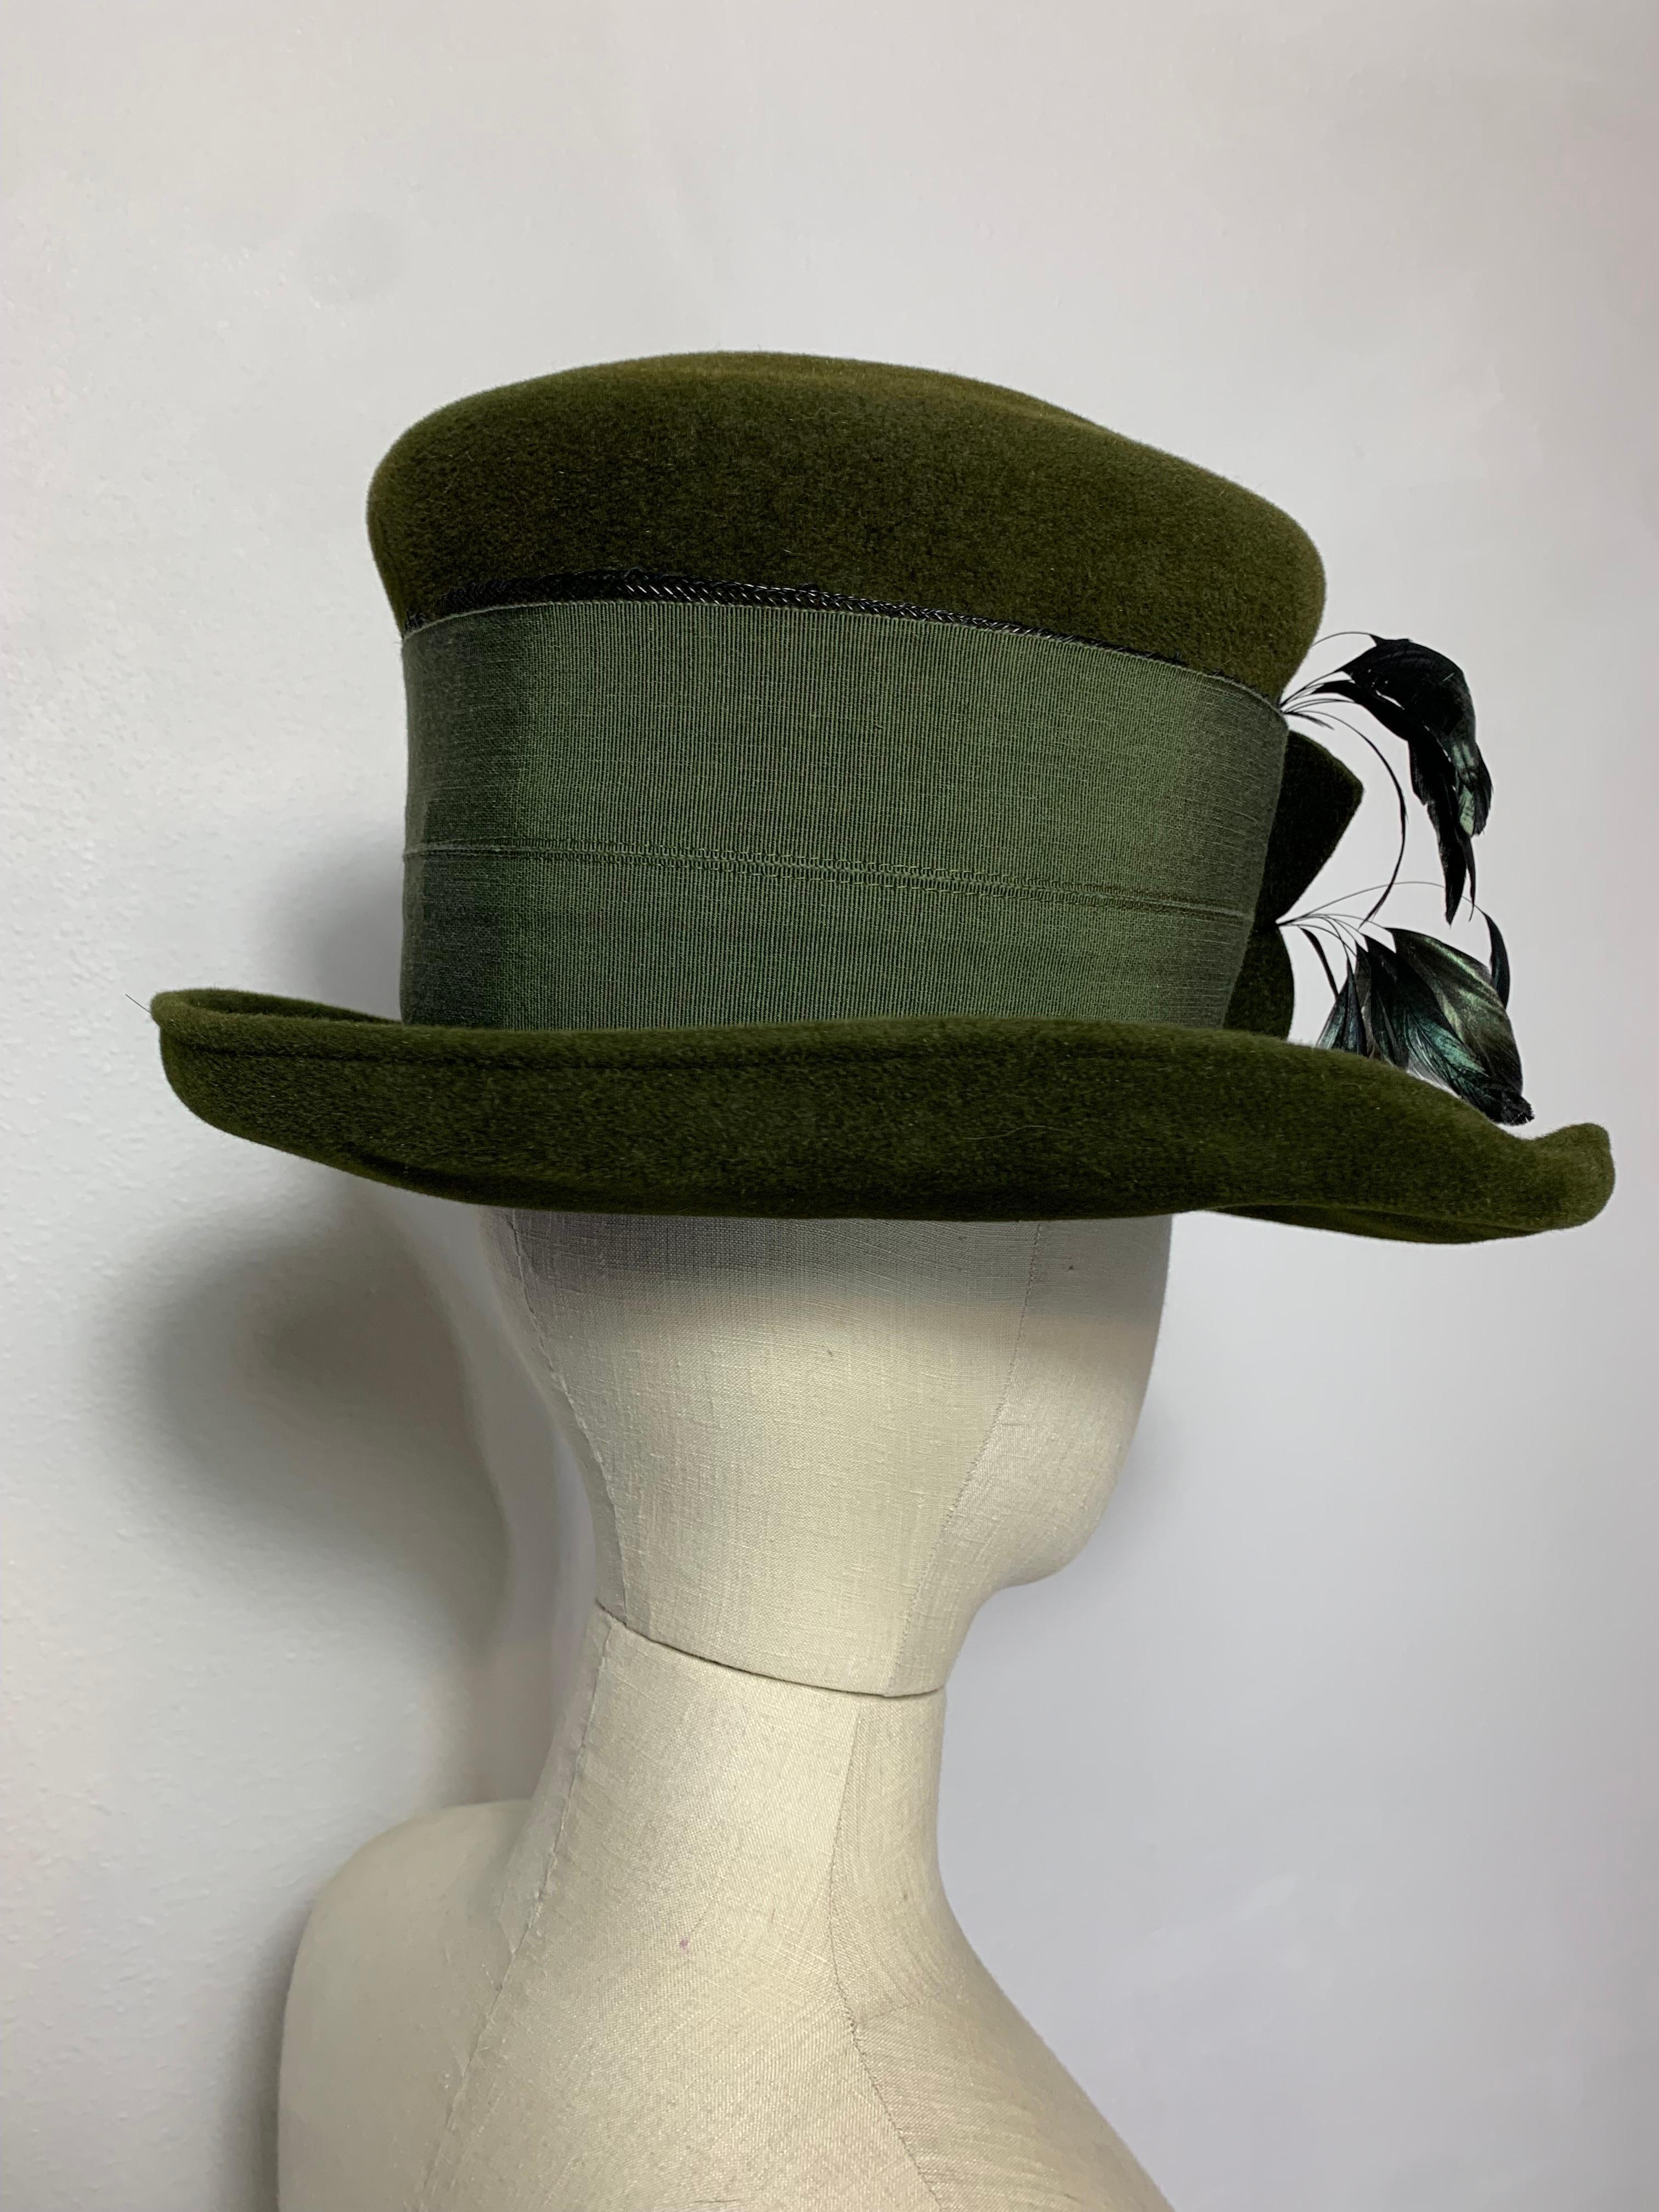 Maison Michel Olive Green Turned Brim Tall Top Hat w Flower Feathers & Grosgrain For Sale 1